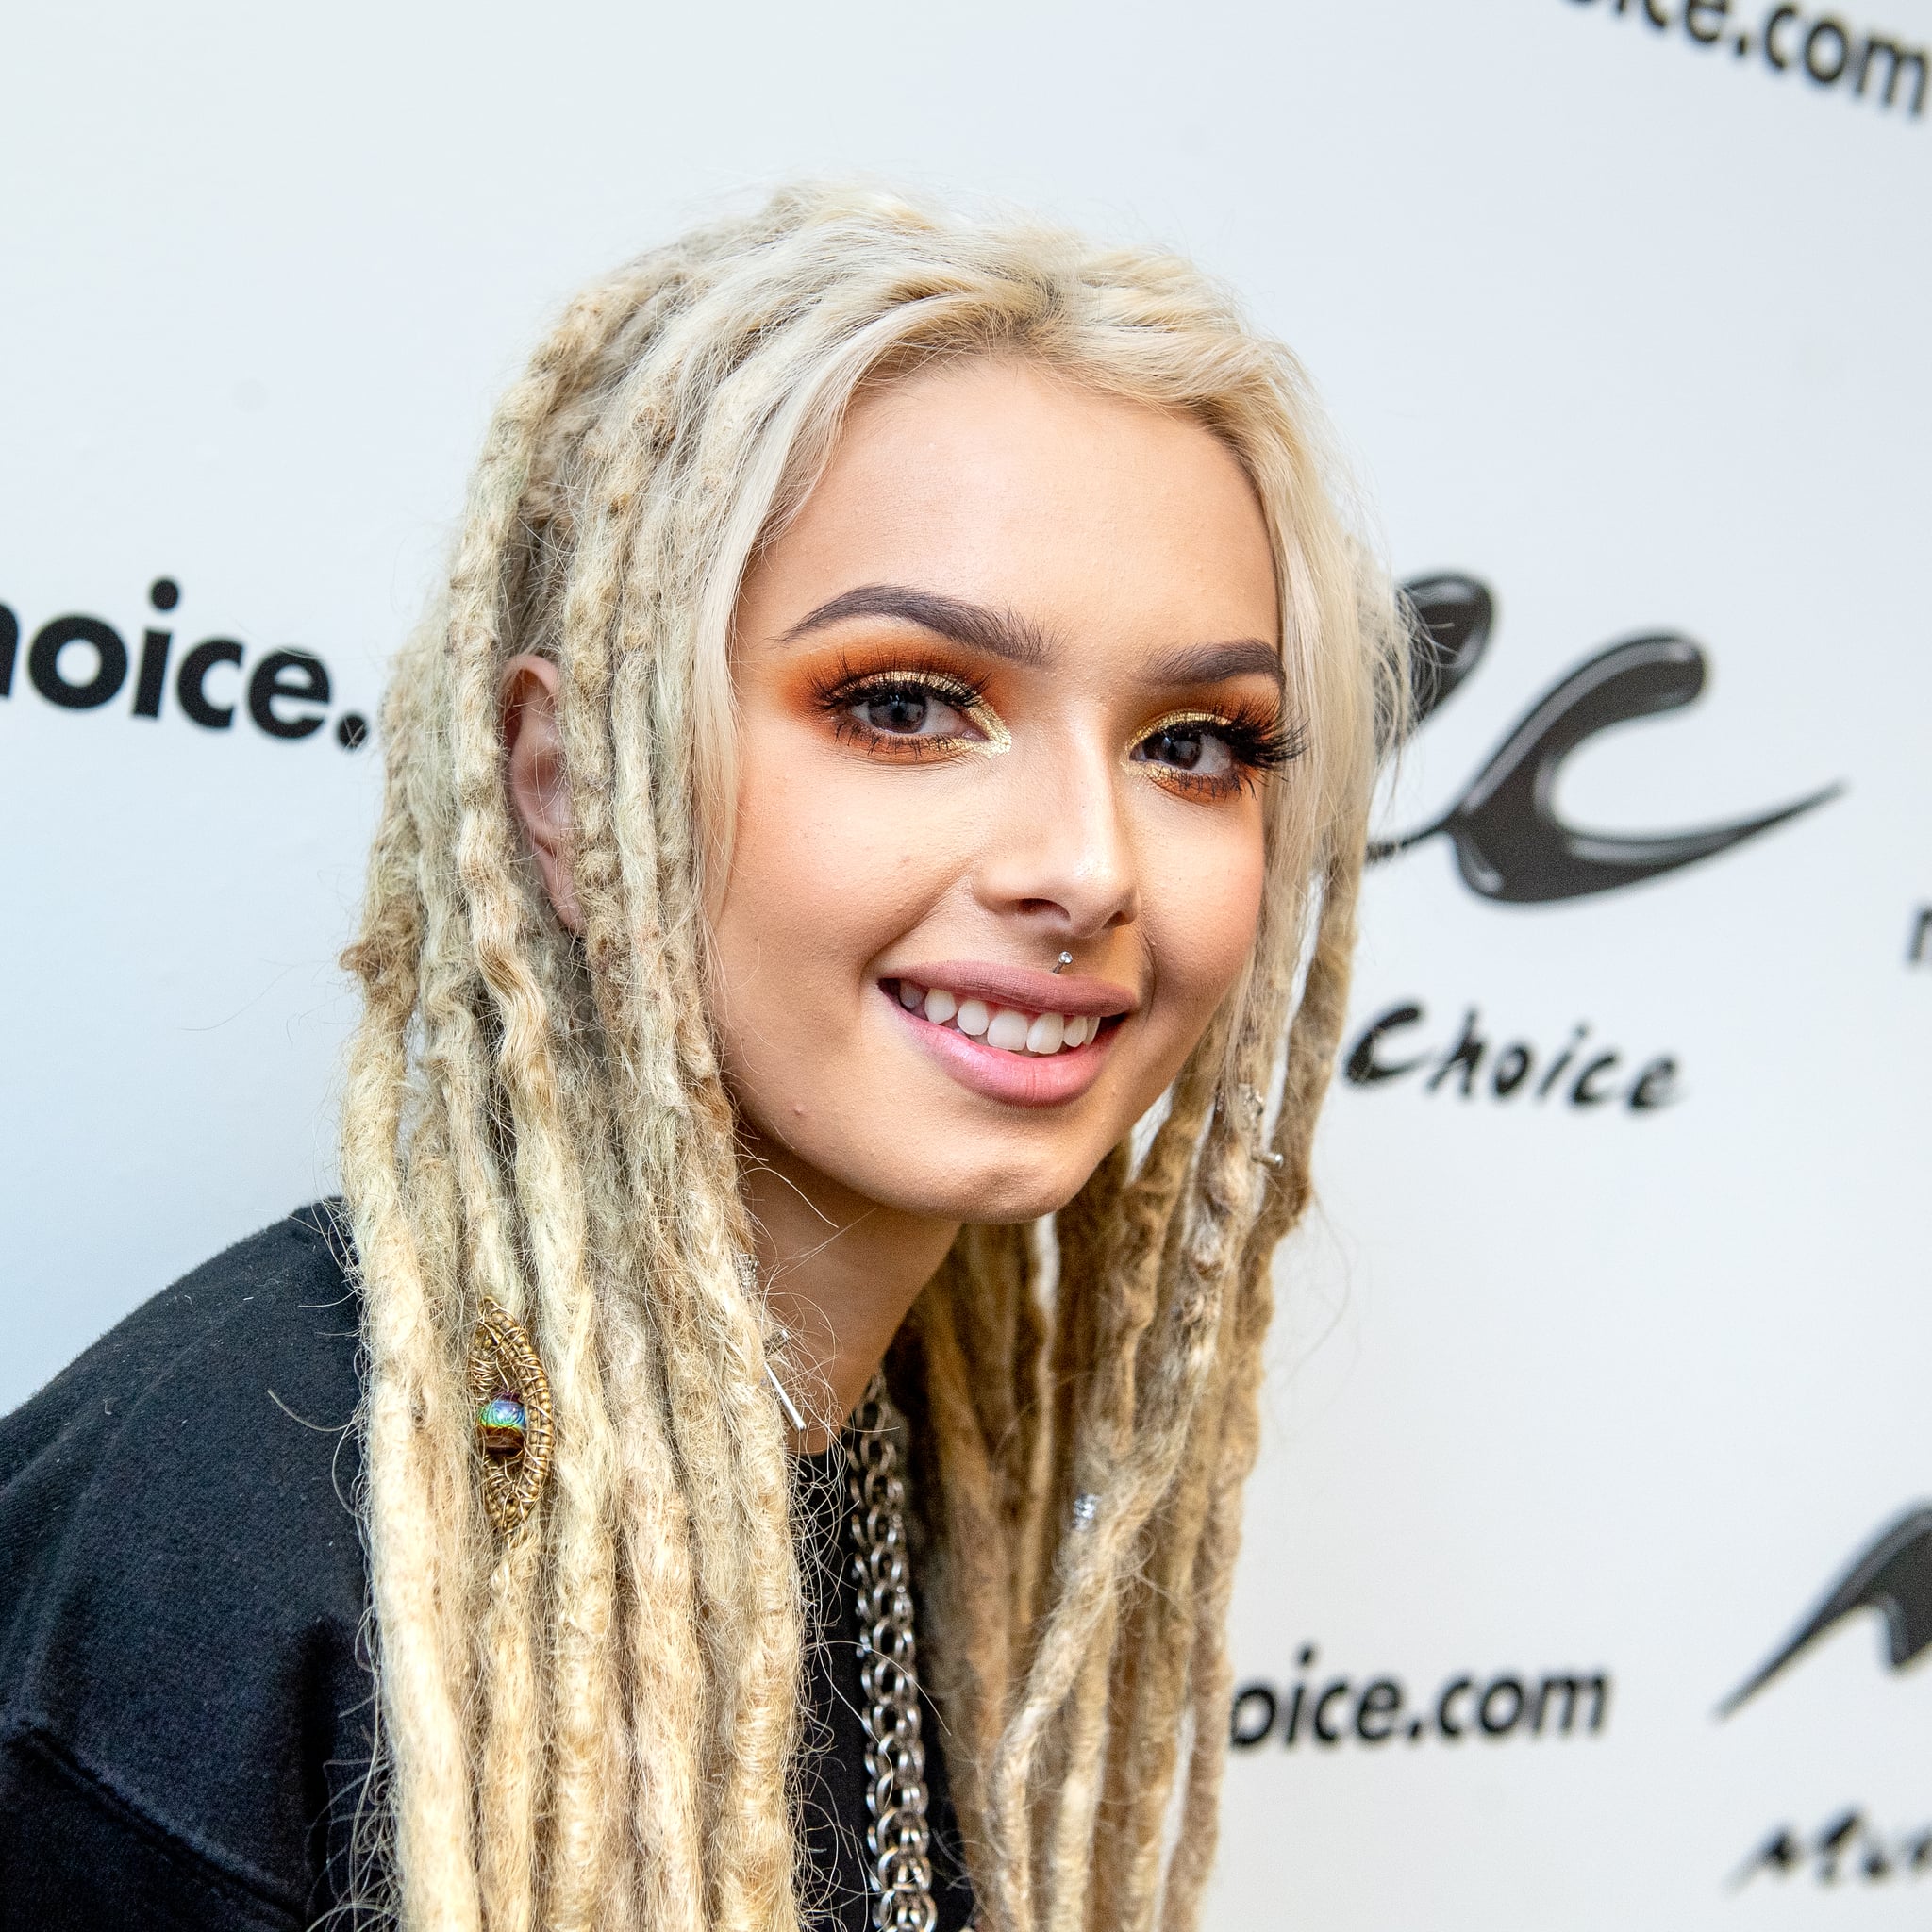 Who Is Zhavia Ward Popsugar Celebrity I grew up in norwalk hanging by the donut shop didn't have a car so we used to have to walk the block i was only six years old, i was running cold barefeet when the storm started coming mama worked two jobs couldn't keep the fridge stocked used to eat popcorn for. who is zhavia ward popsugar celebrity